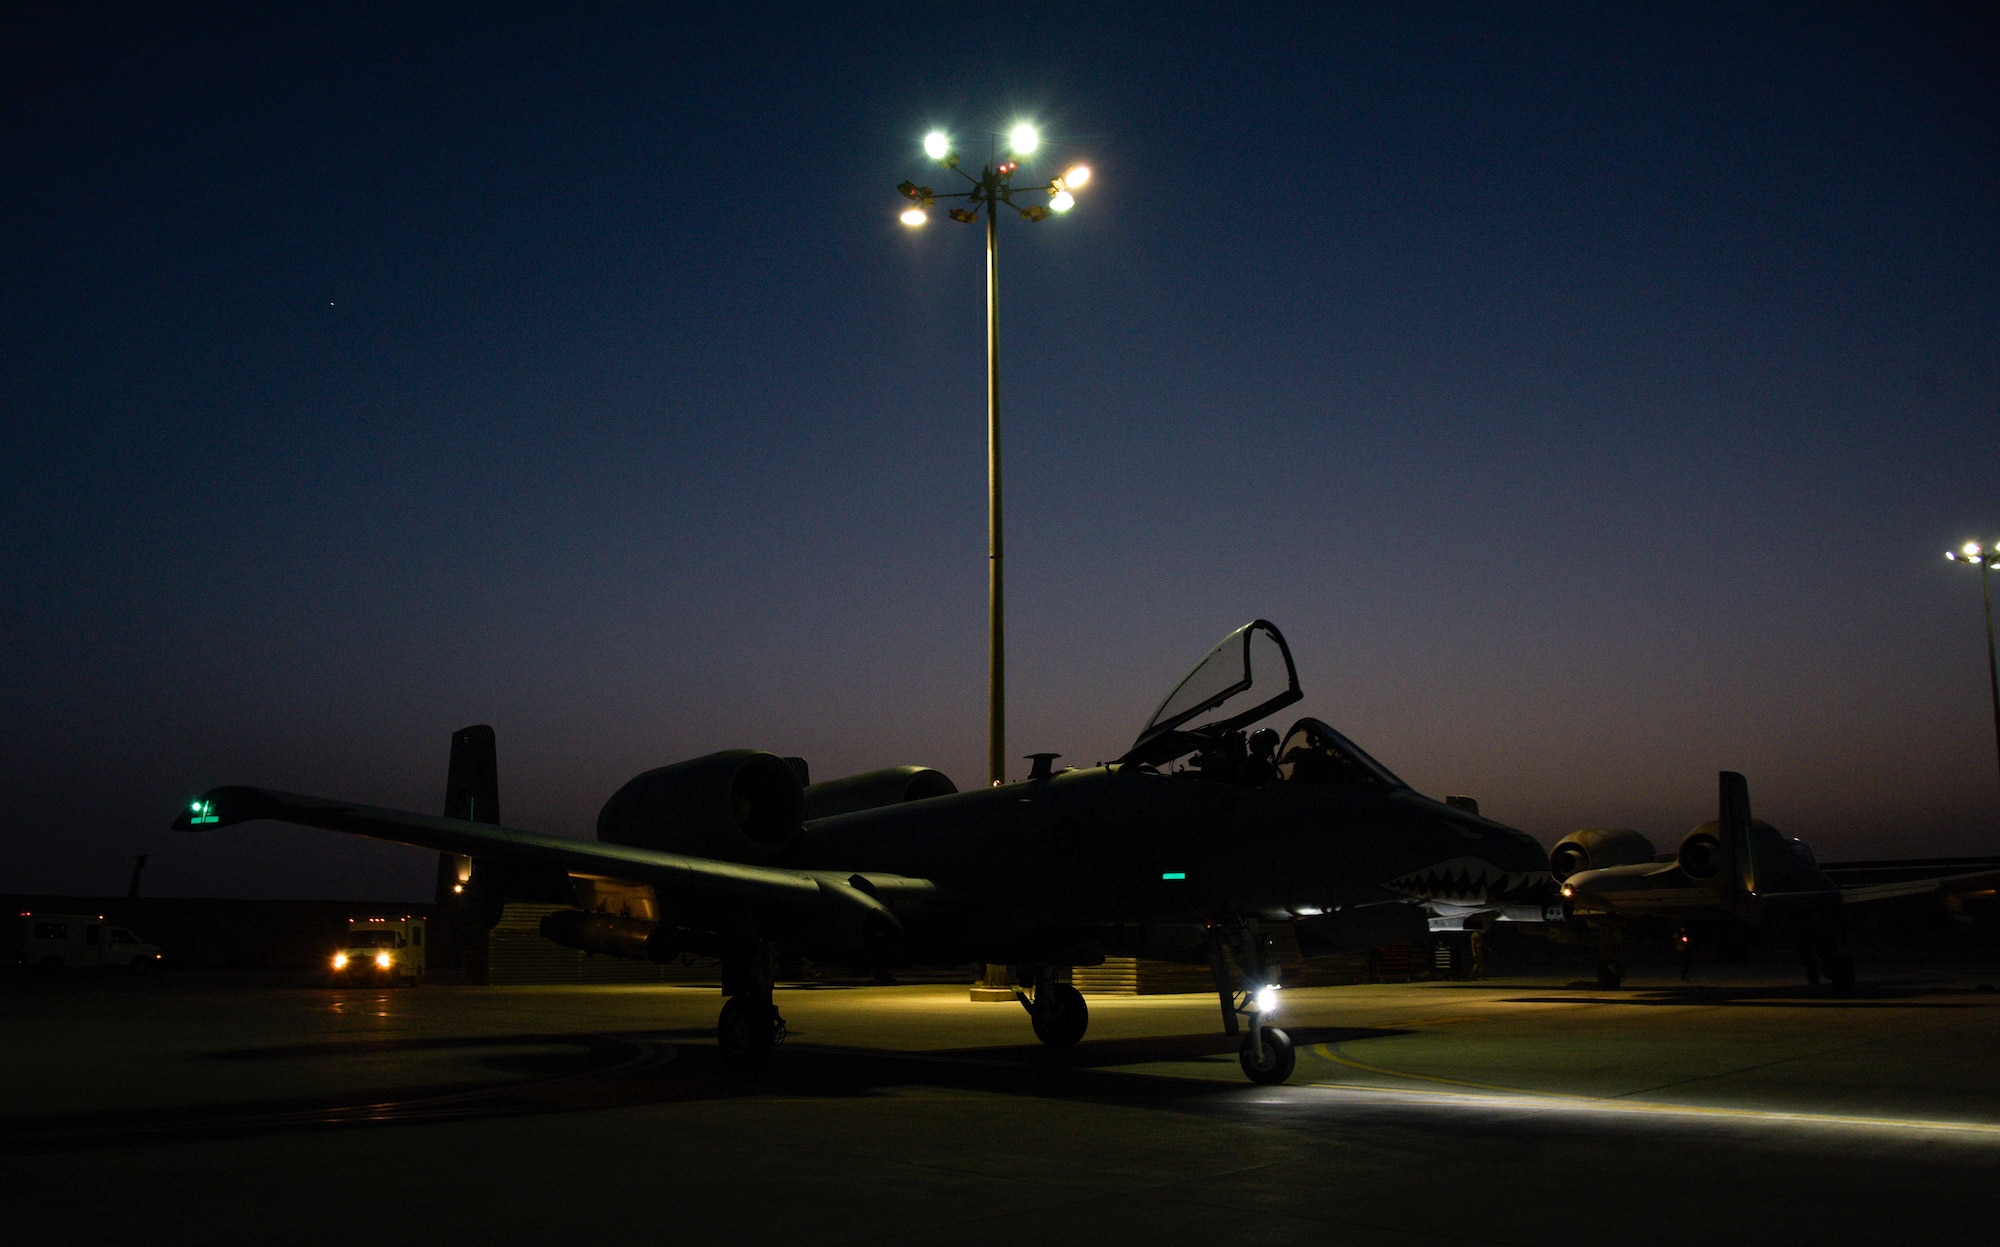 An A-10C Thunderbolt II pilot from the 75th Expeditionary Fighter Squadron, prepares to park after a mission on Kandahar Airfield, Afghanistan, Aug. 2, 2018. The mission, in support of Operation Freedom's Sentinel, provided aide to Afghan coalition partners against opposing forces. (U.S.  Air Force photo by Staff Sgt. Kristin High)